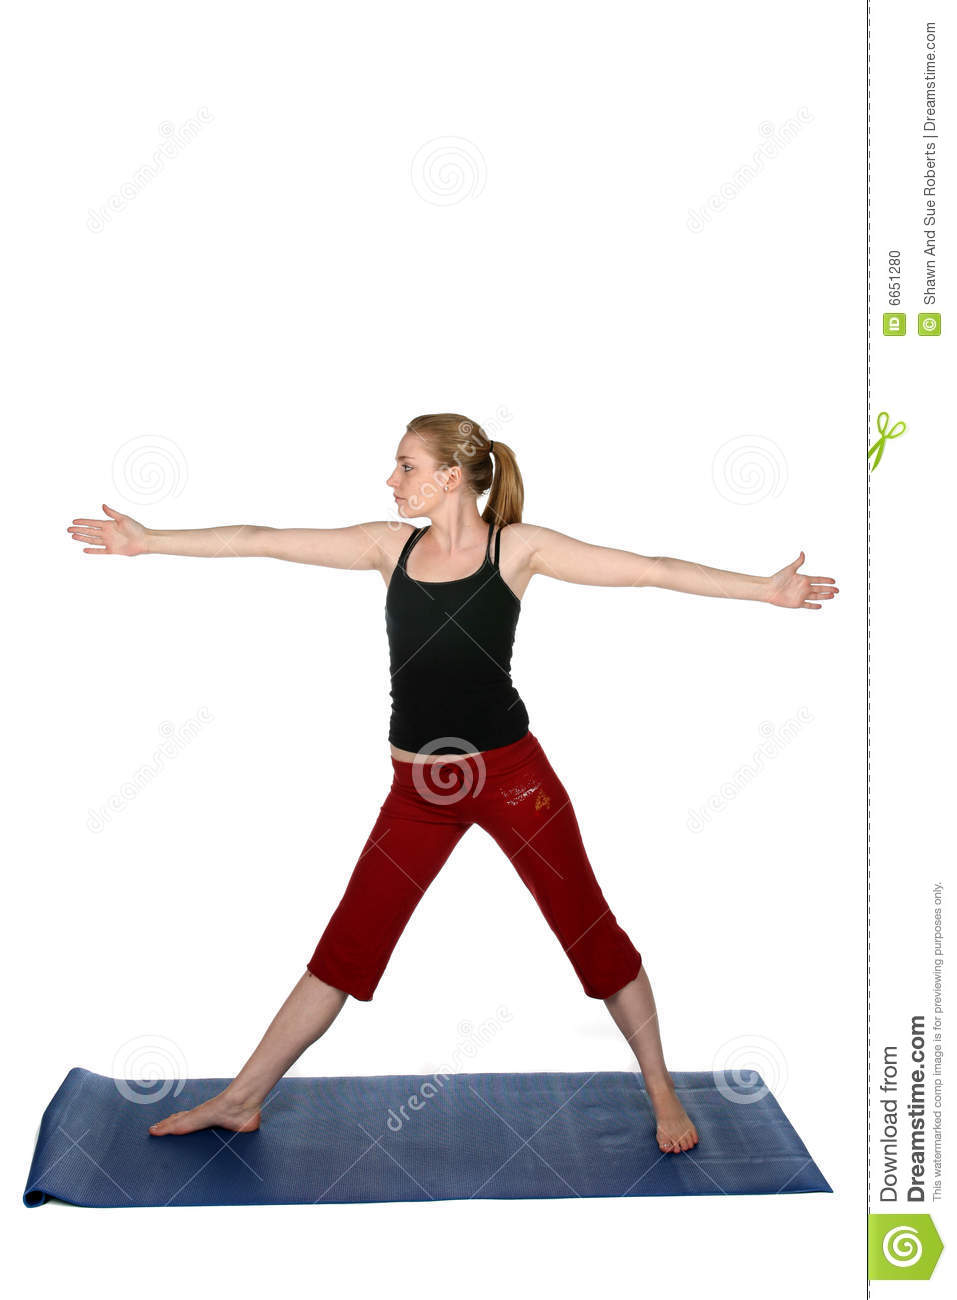 Young Woman In Standing Yoga Pose Stock Photo   Image  6651280